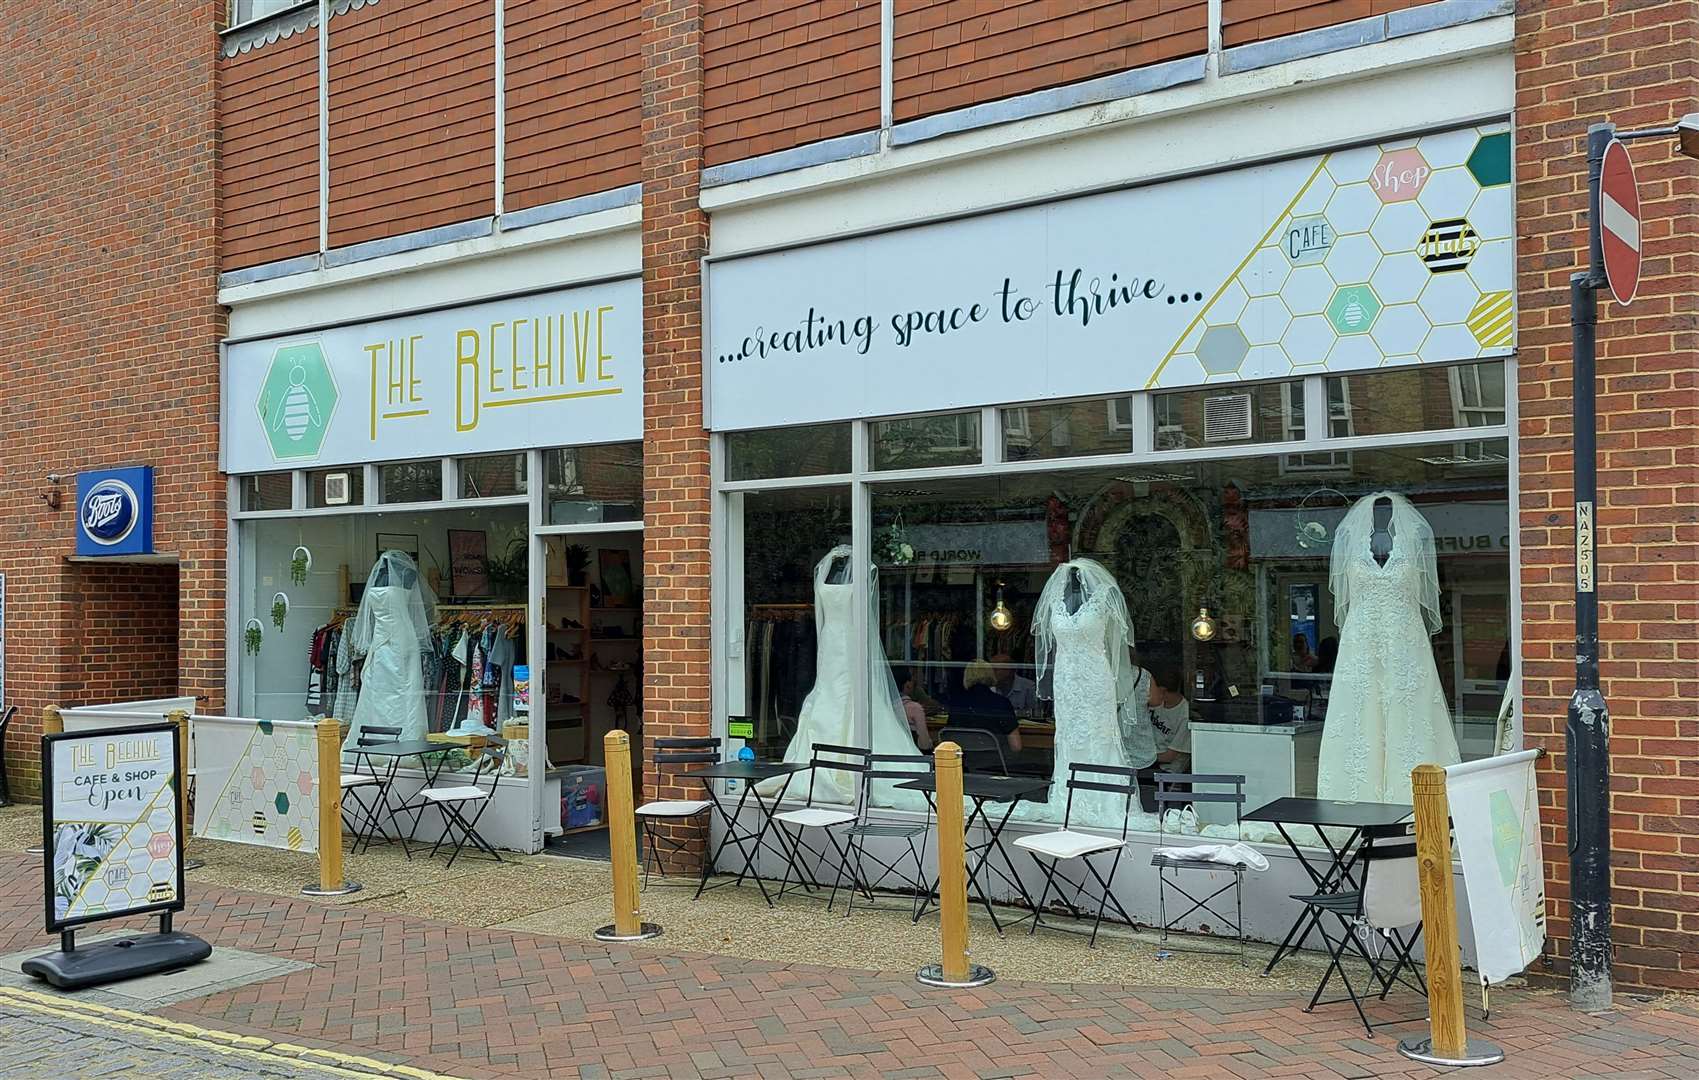 The existing Beehive shop in North Street, Ashford